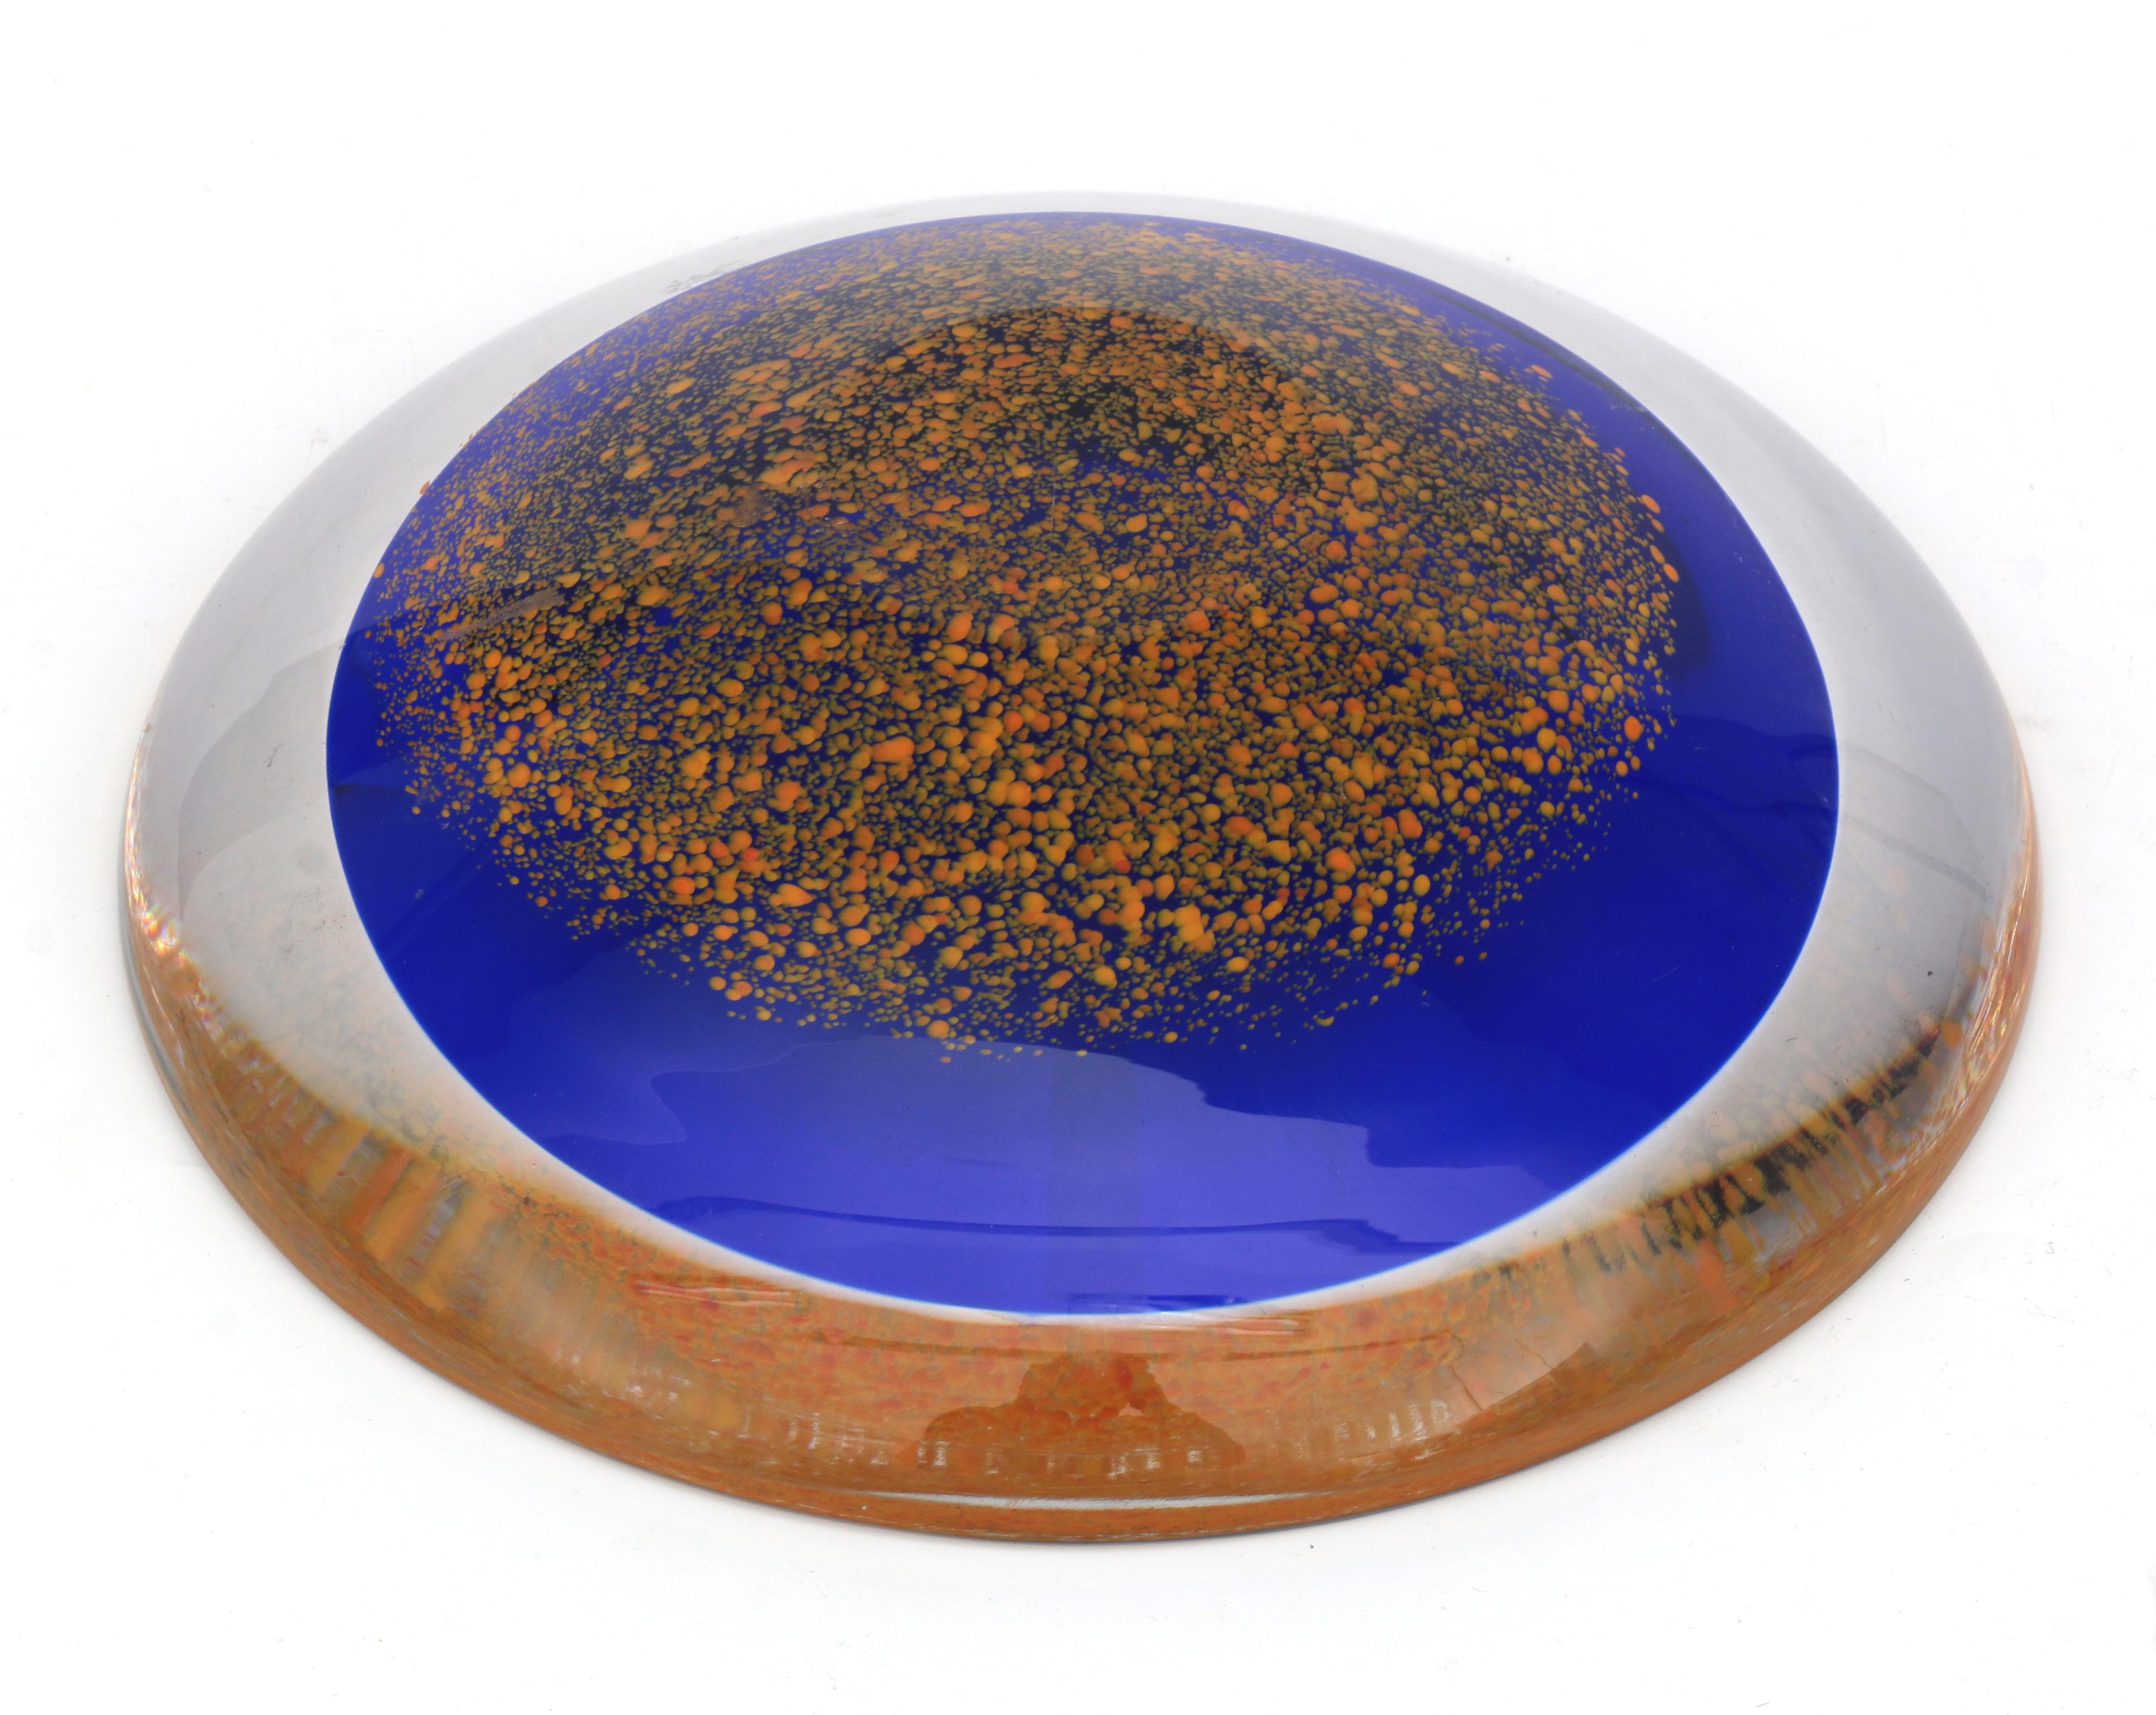 Olaf Stevens (1954) A heavy blue glass dish with clear overlay and yellow inclusions, multiple, - Image 2 of 5